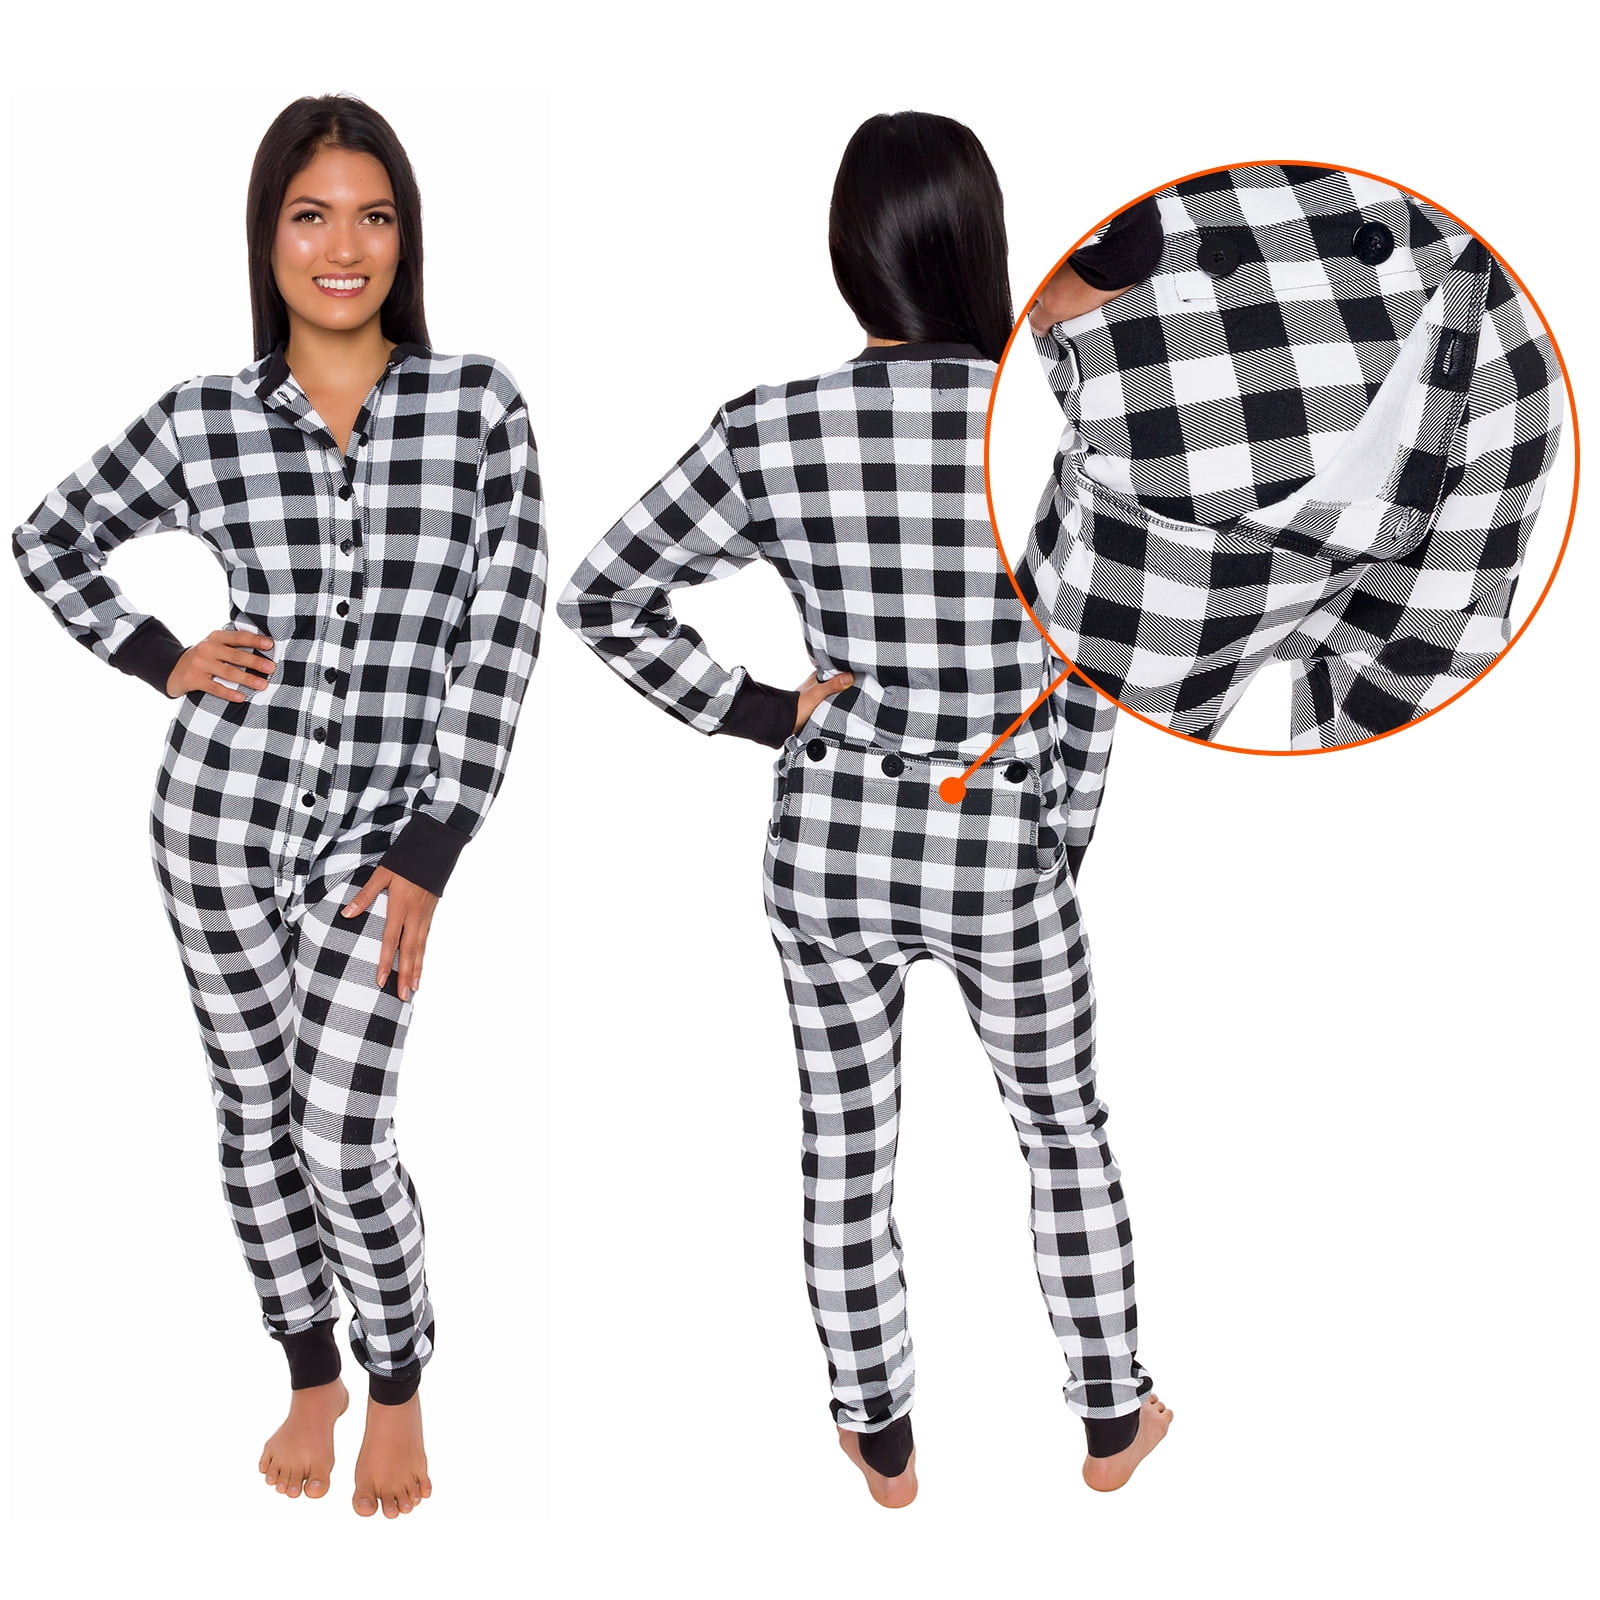 Womens onesie with drop seat